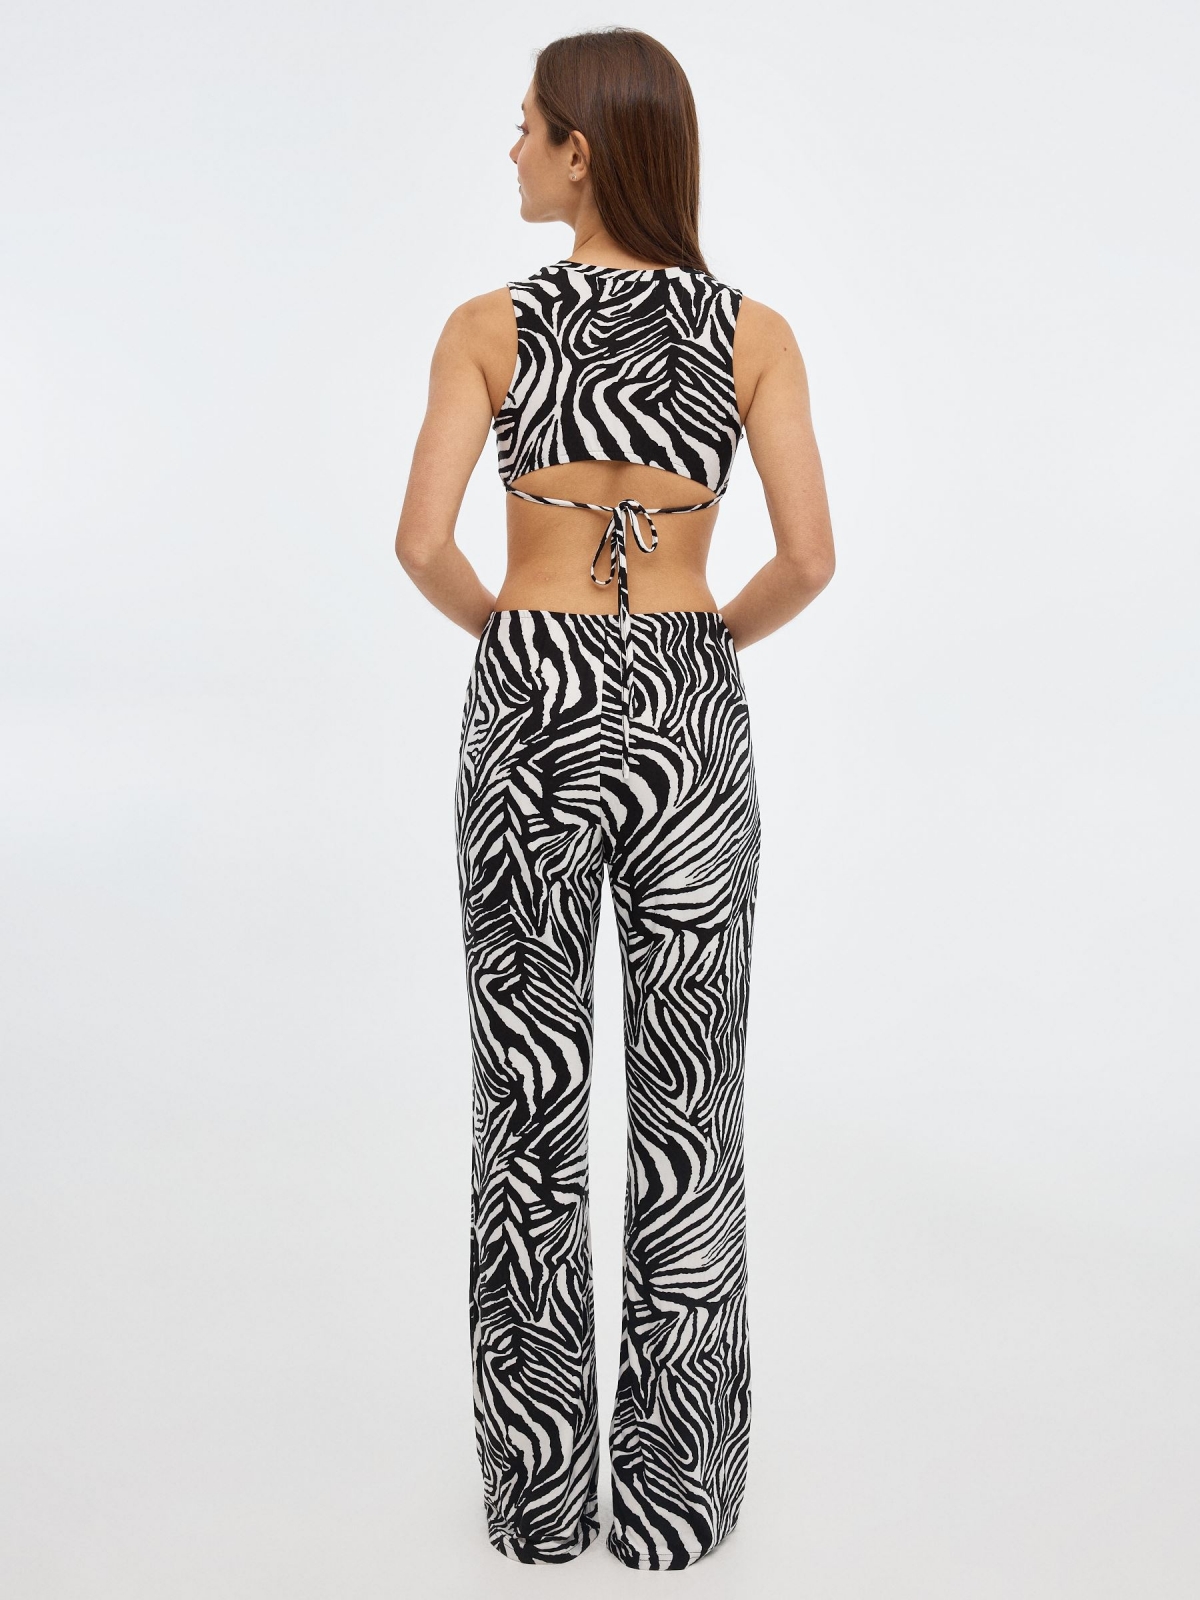 Animalprint cut out jumpsuit off white middle front view